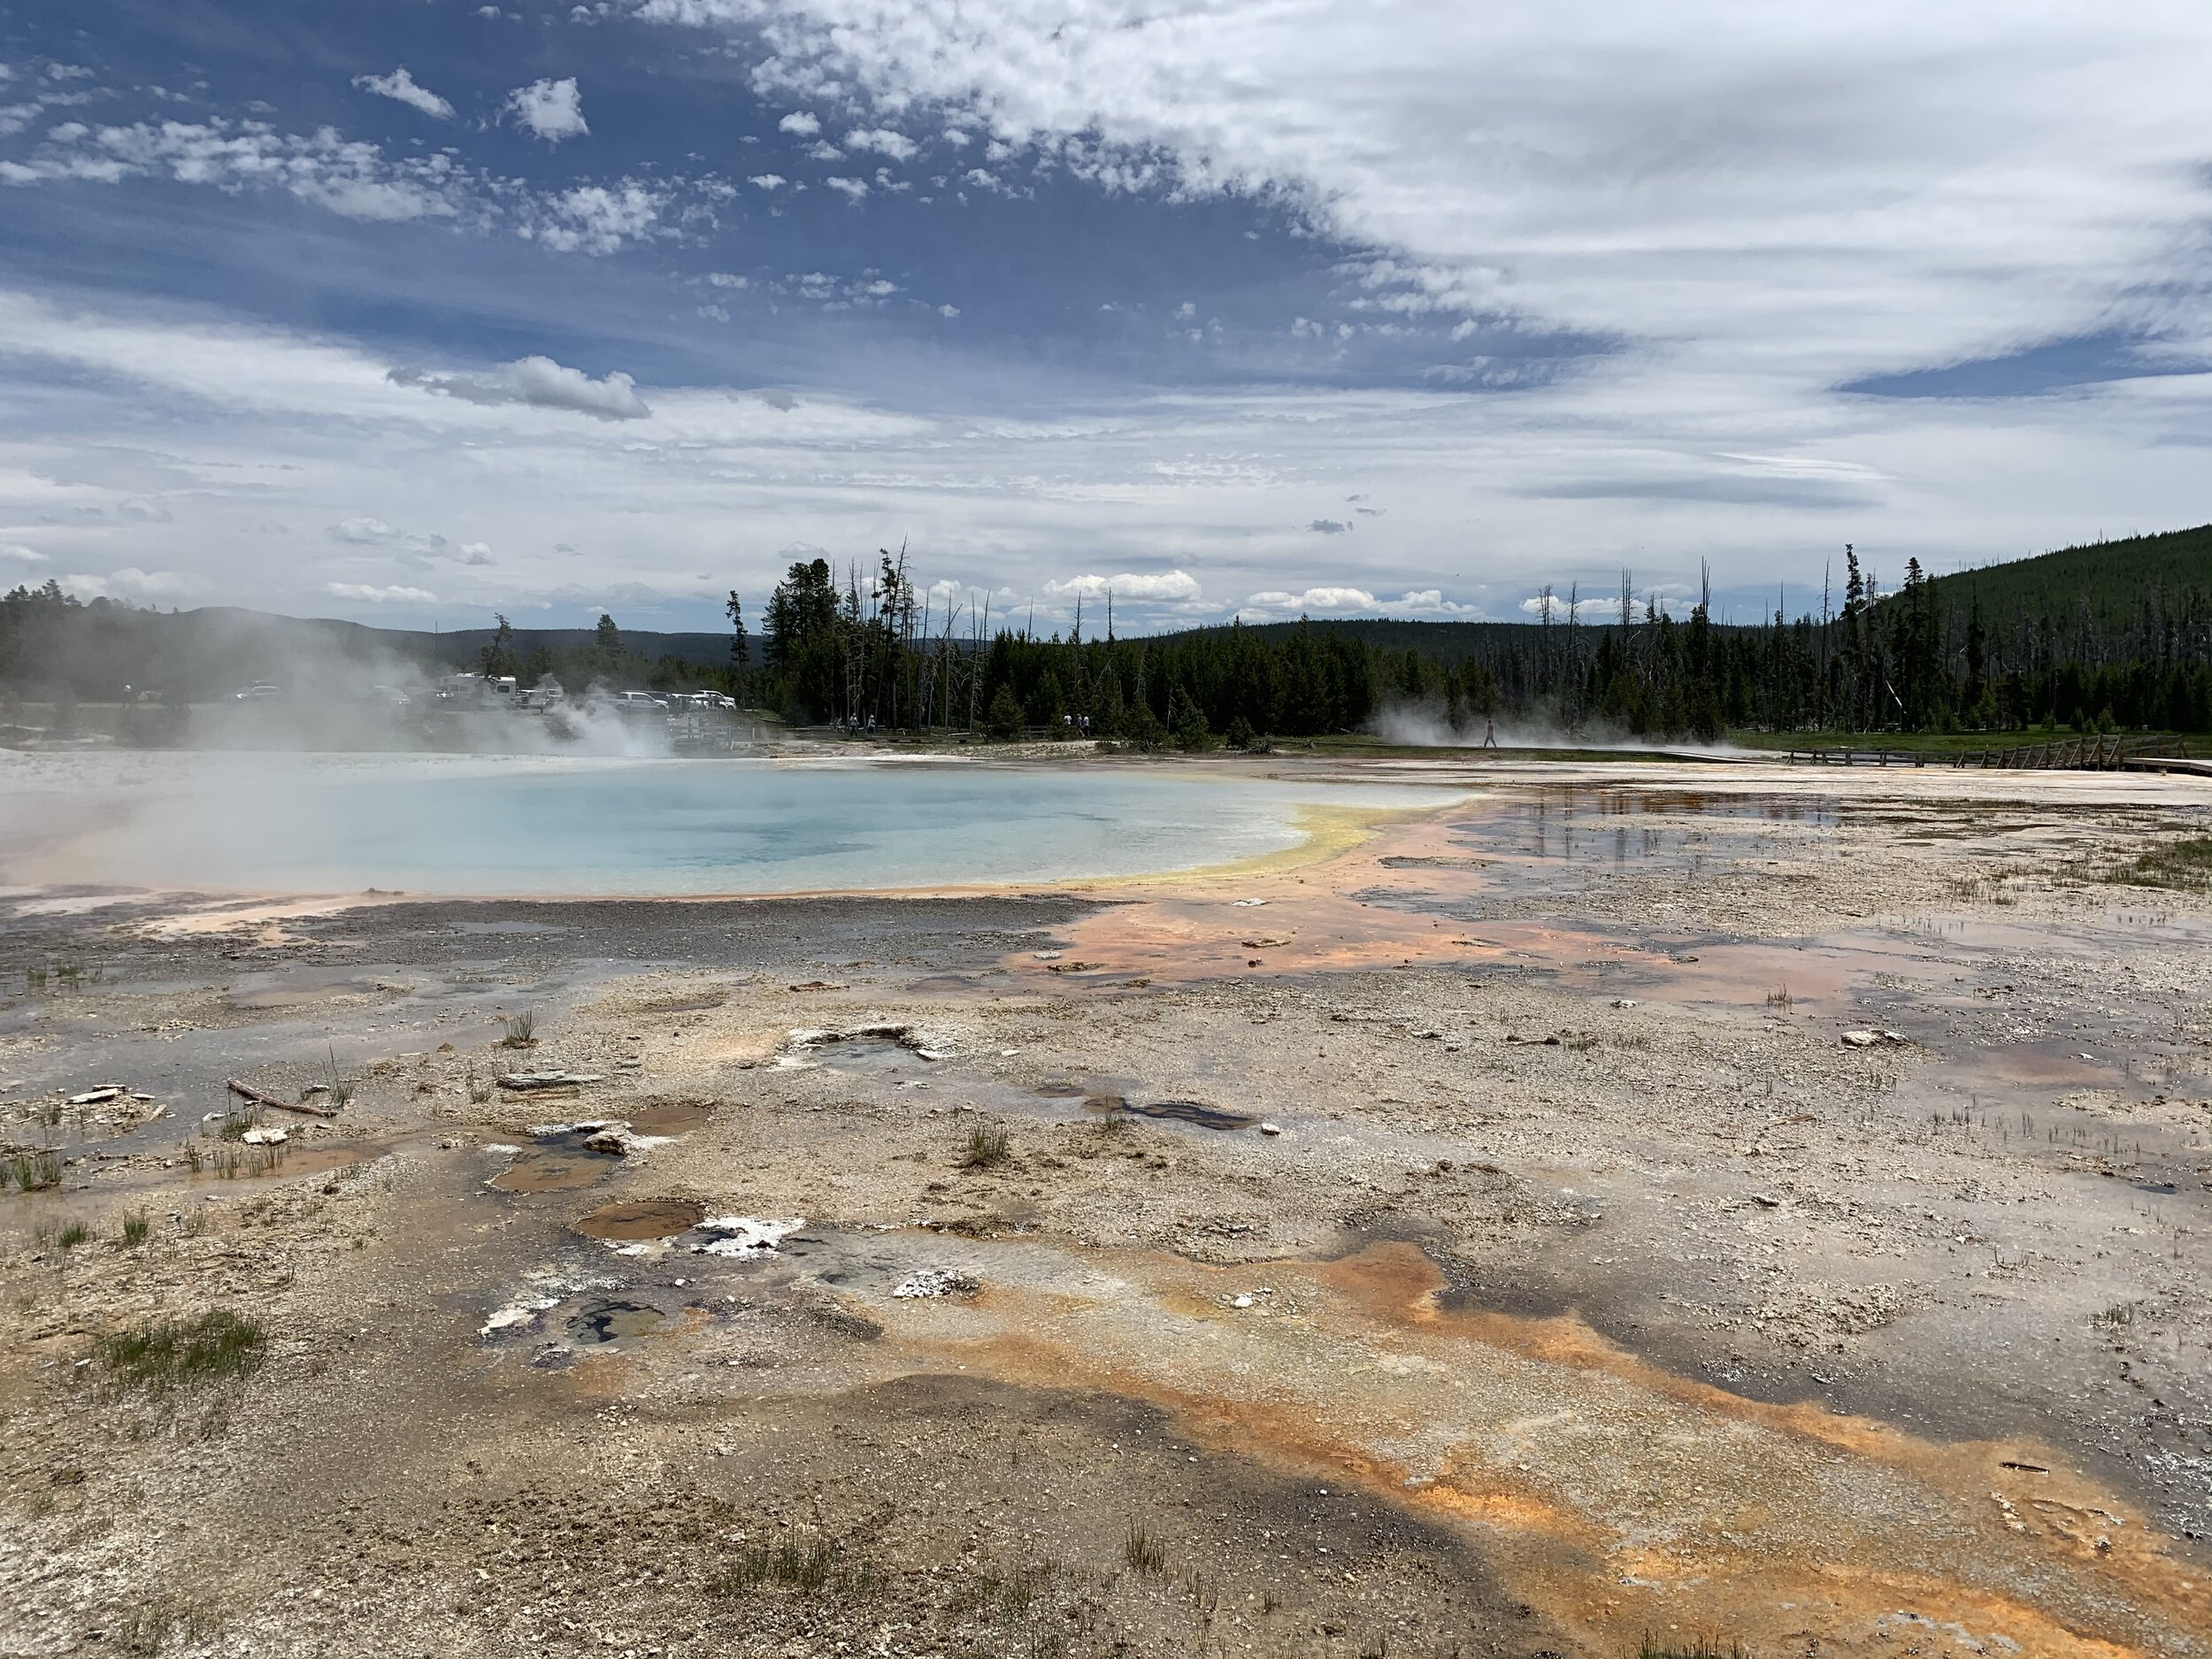  The geysers and springs are acidic because they are fed by thermal water deep underground that picks up sulfuric acid as it rises to the surface. For this reason, they can be very dangerous to humans if safety guidelines are not followed. In recent 